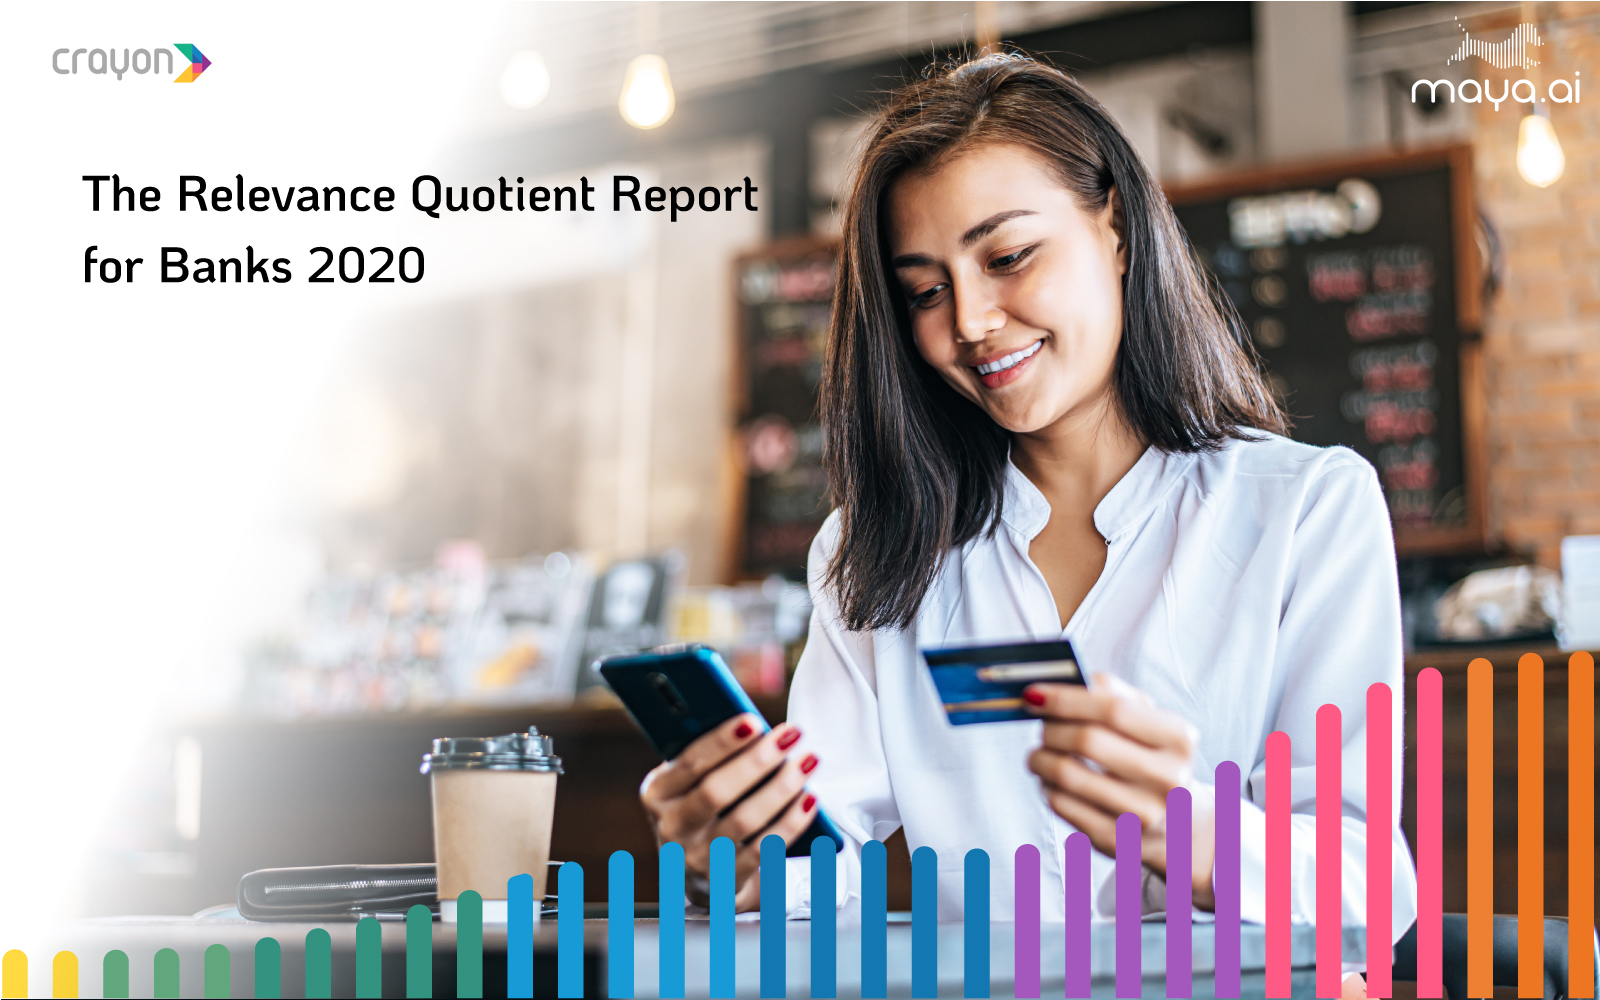 The Relevance Quotient Report 2020 for banks: the COVID-19 edition